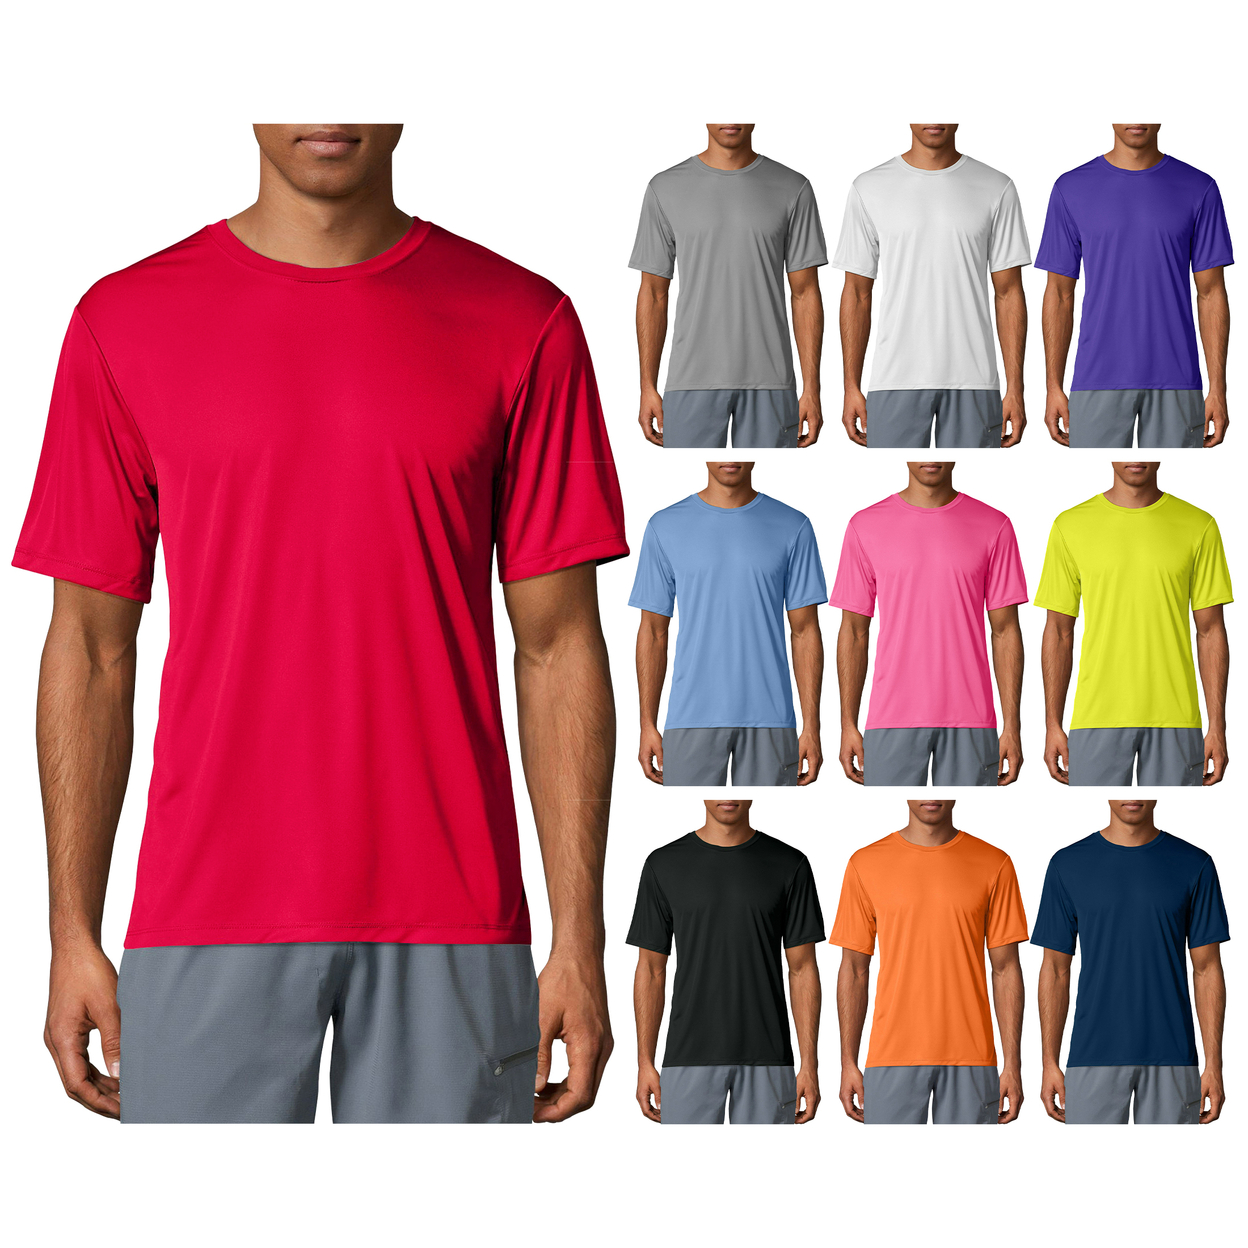 6-Pack: Men's Moisture Wicking Cool Dri-Fit Performance Short Sleeve Crew Neck T-Shirts - Large